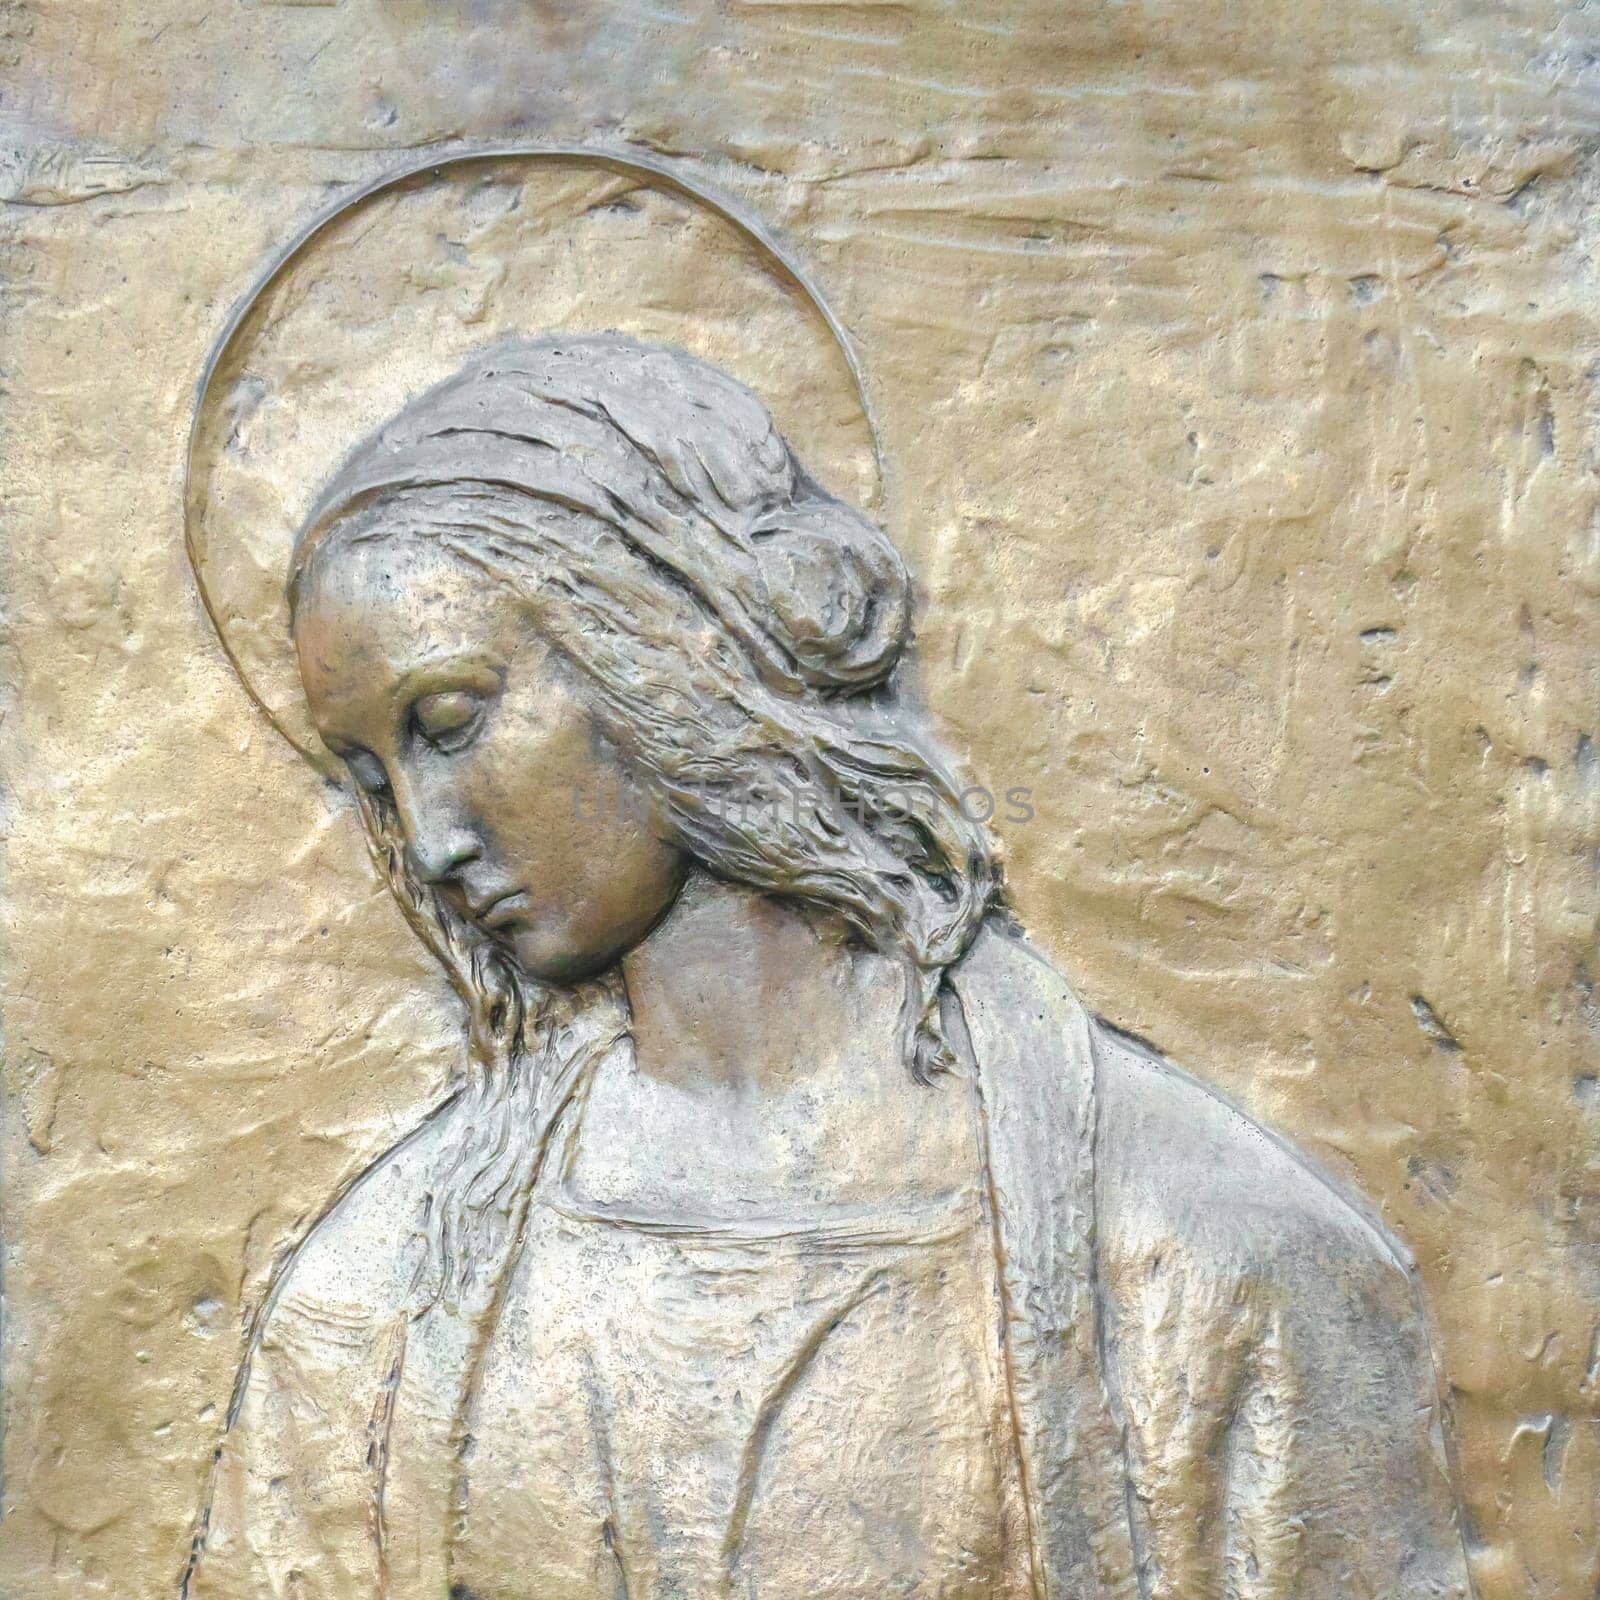 Bronze bas-relief of the Virgin Mary by germanopoli